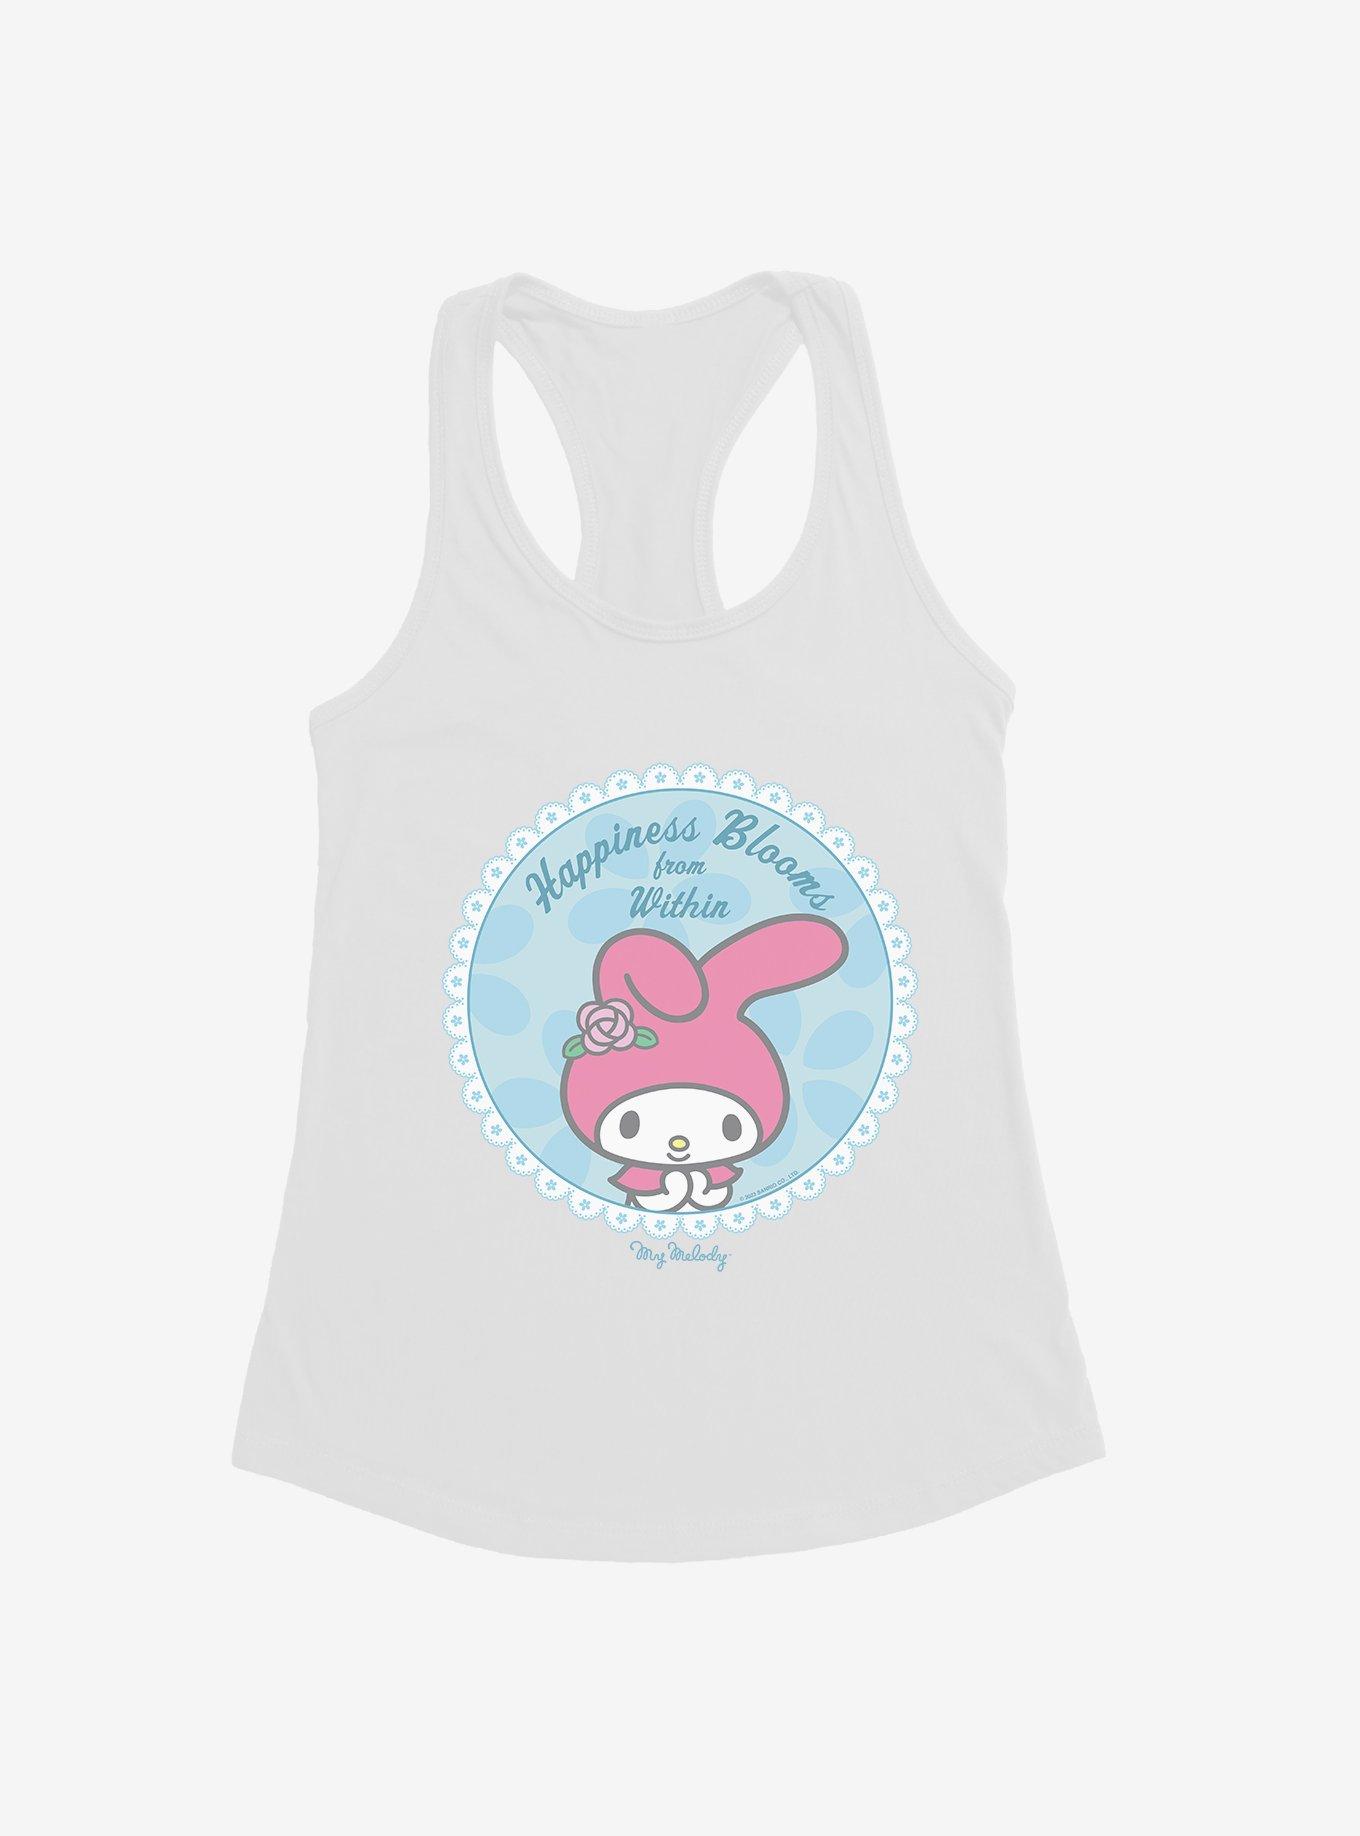 My Melody Happiness Blooms From Within Womens Tank Top, WHITE, hi-res